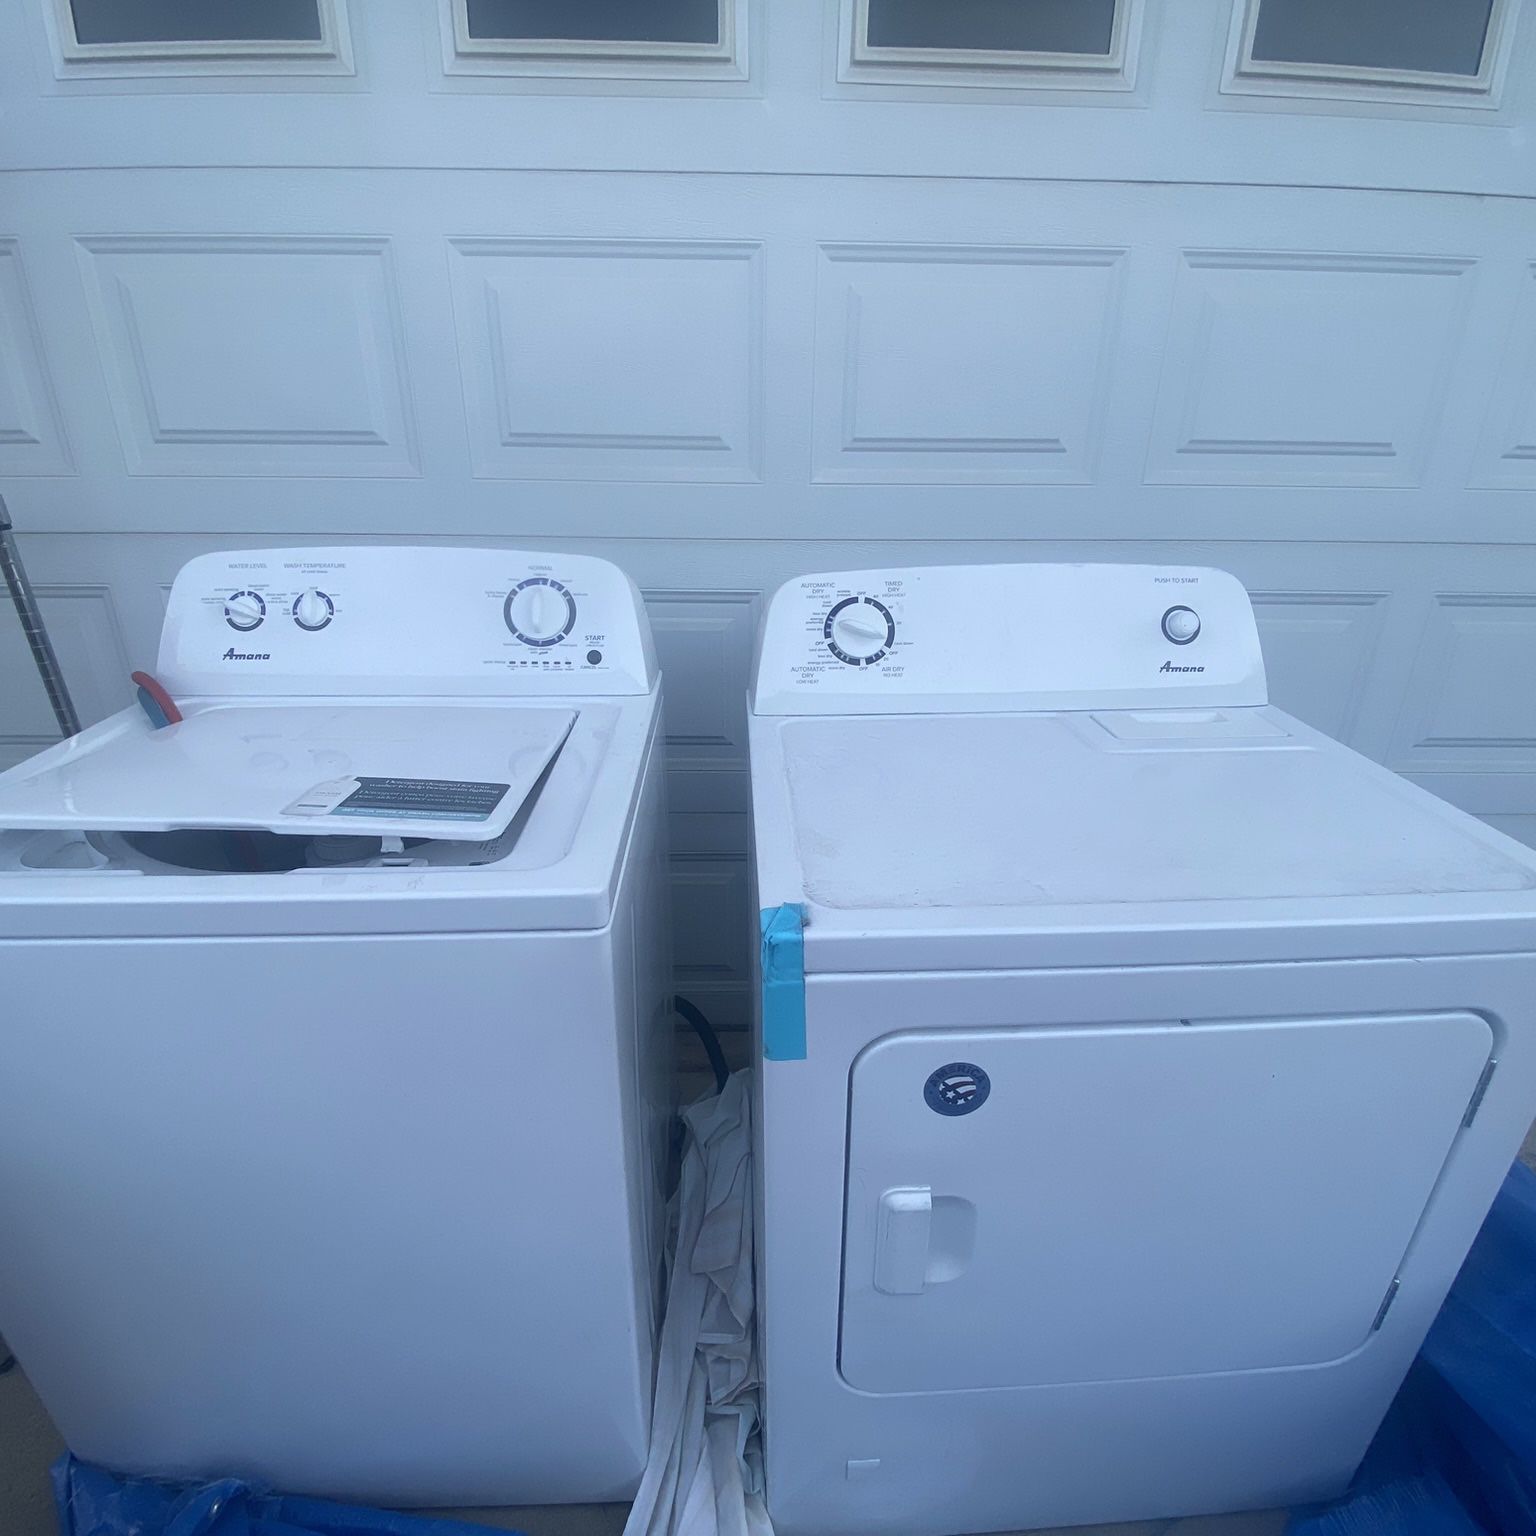 Washer And Dryer! 